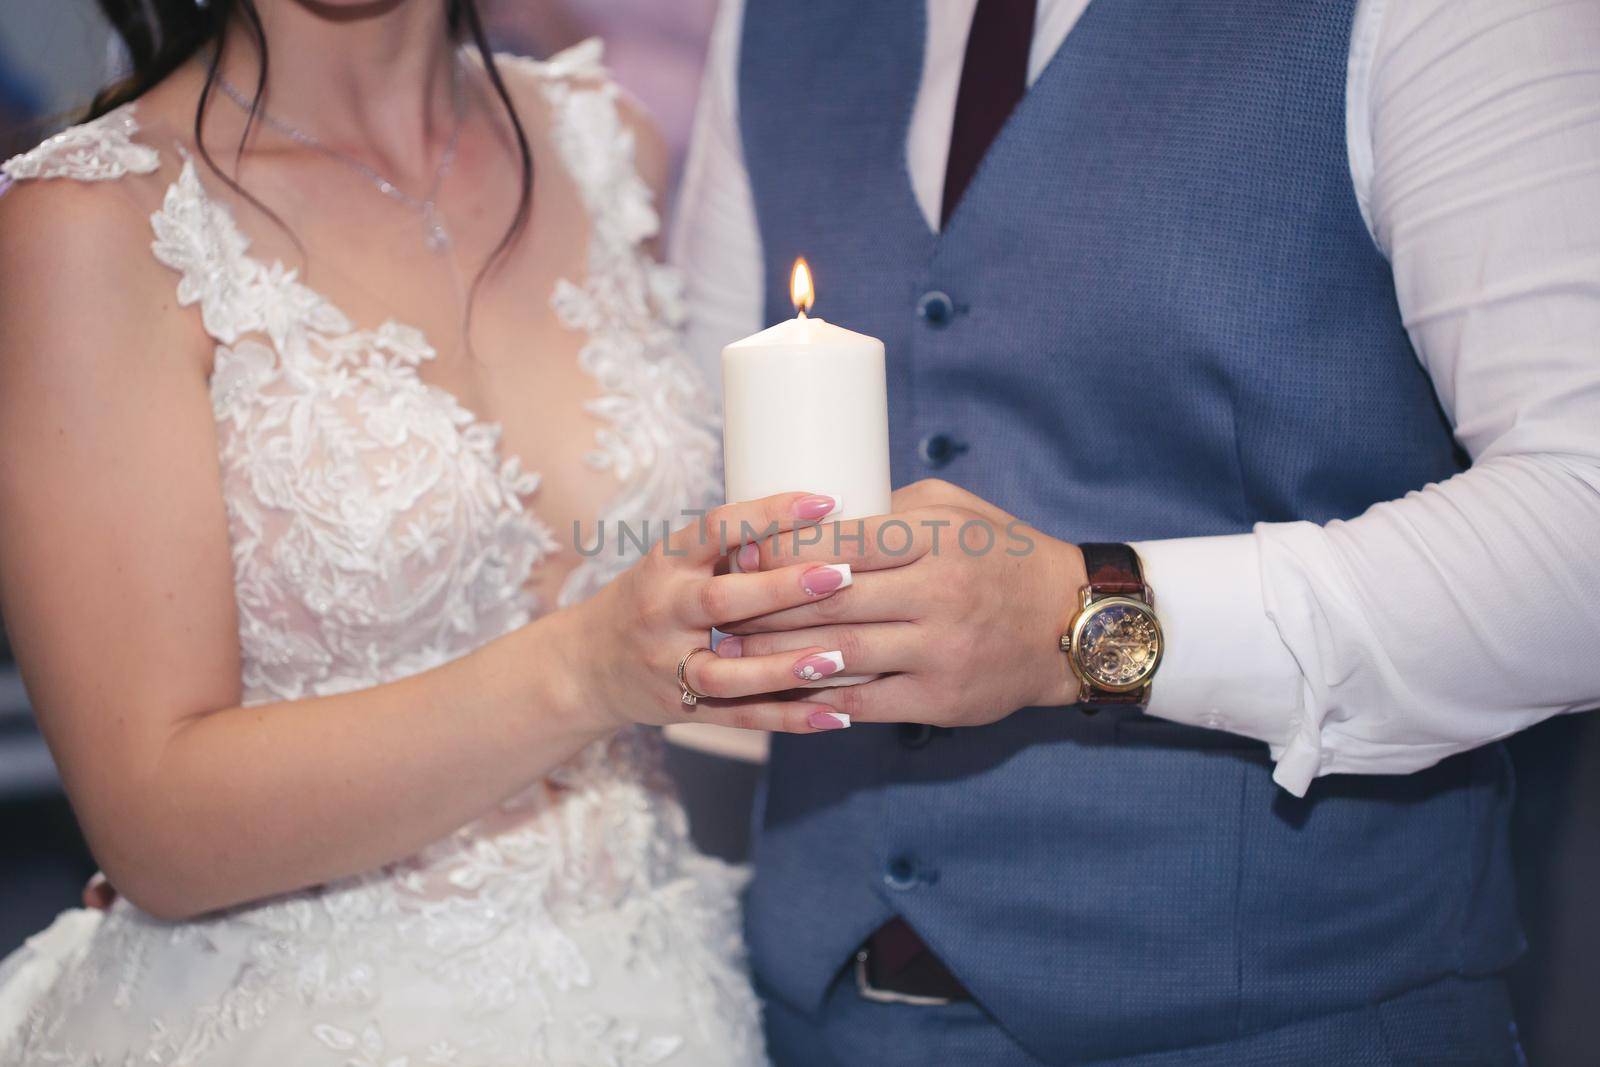 Wedding ceremony, paraphernalia, the bride and groom hold a large candle in their hand. by StudioPeace